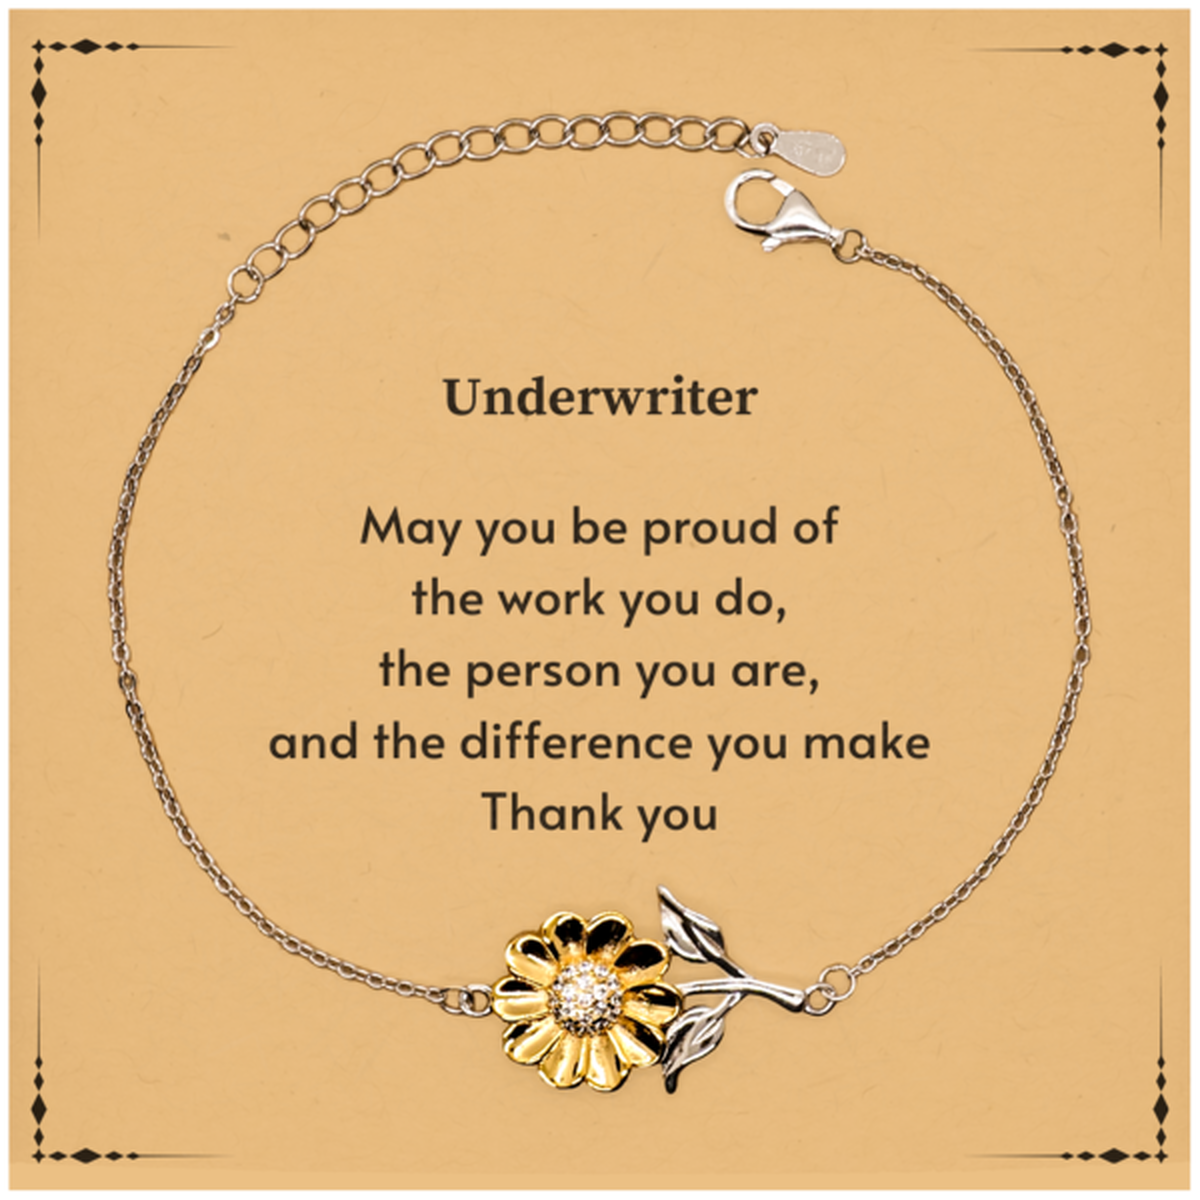 Heartwarming Sunflower Bracelet Retirement Coworkers Gifts for Underwriter, Underwriter May You be proud of the work you do, the person you are Gifts for Boss Men Women Friends